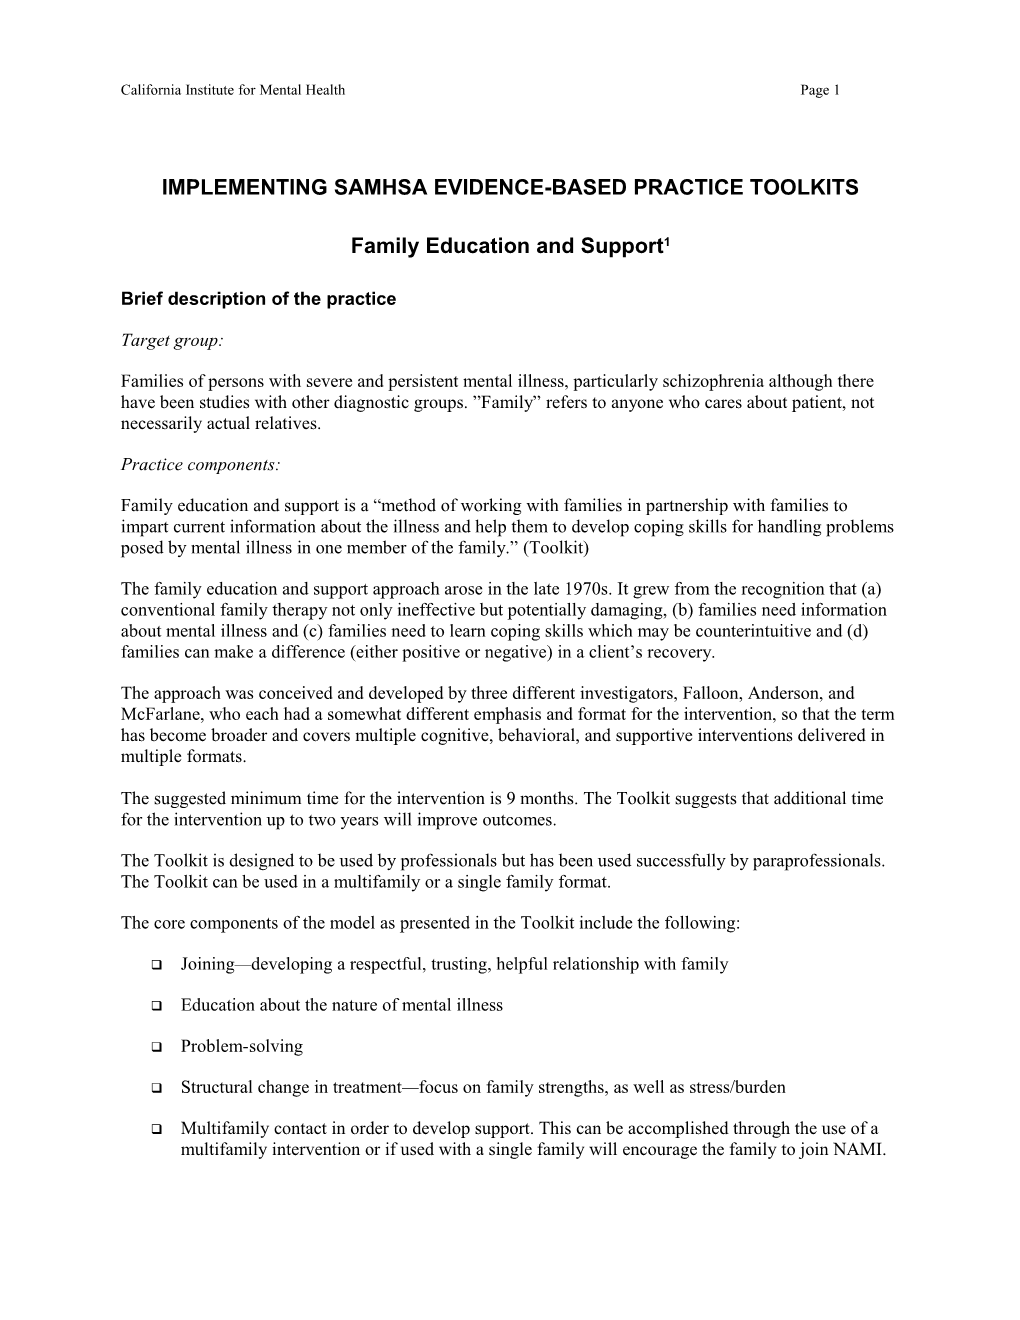 Implementing Samhsa Evidence-Based Practice Toolkits